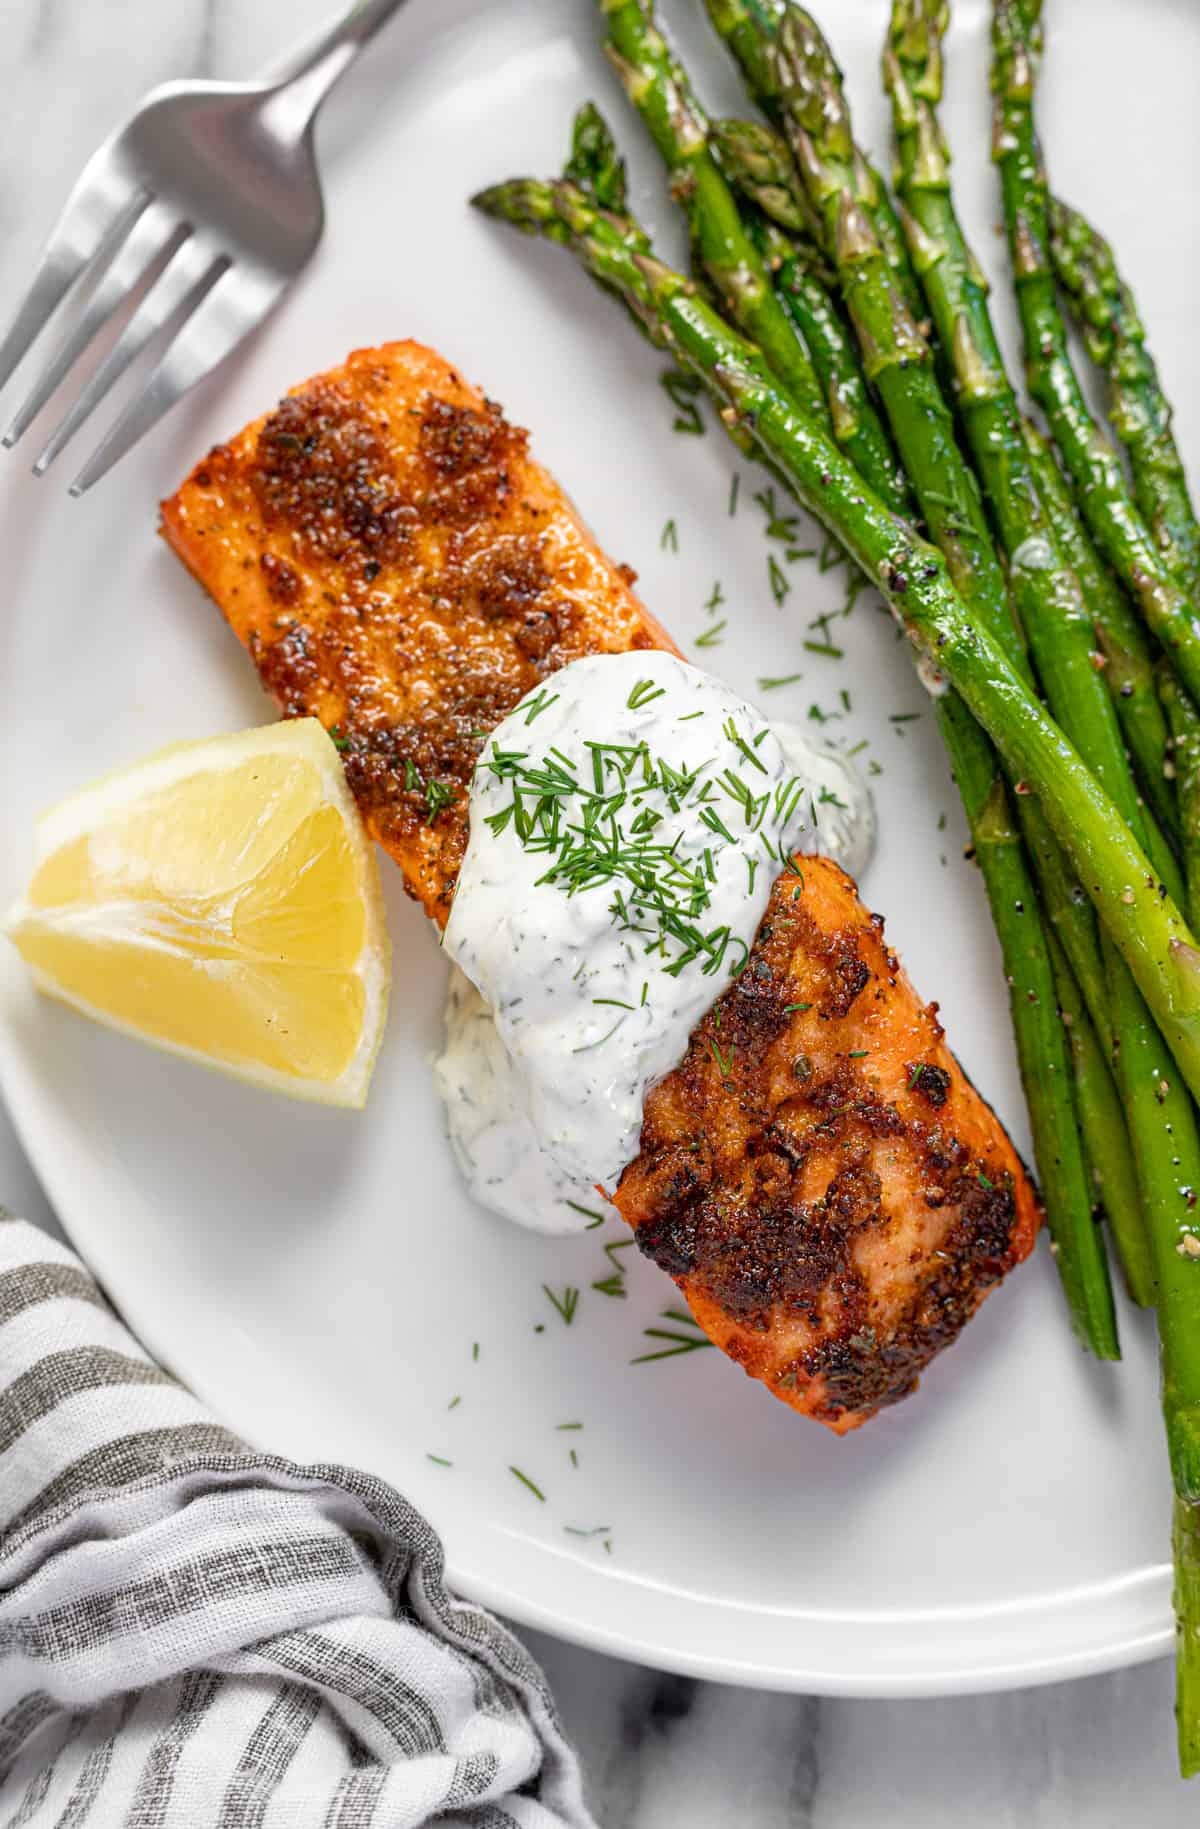 White plate with 1 fillet of salmon drizzled with dill sauce, sauteed asparagus, and a wedge of lemon.